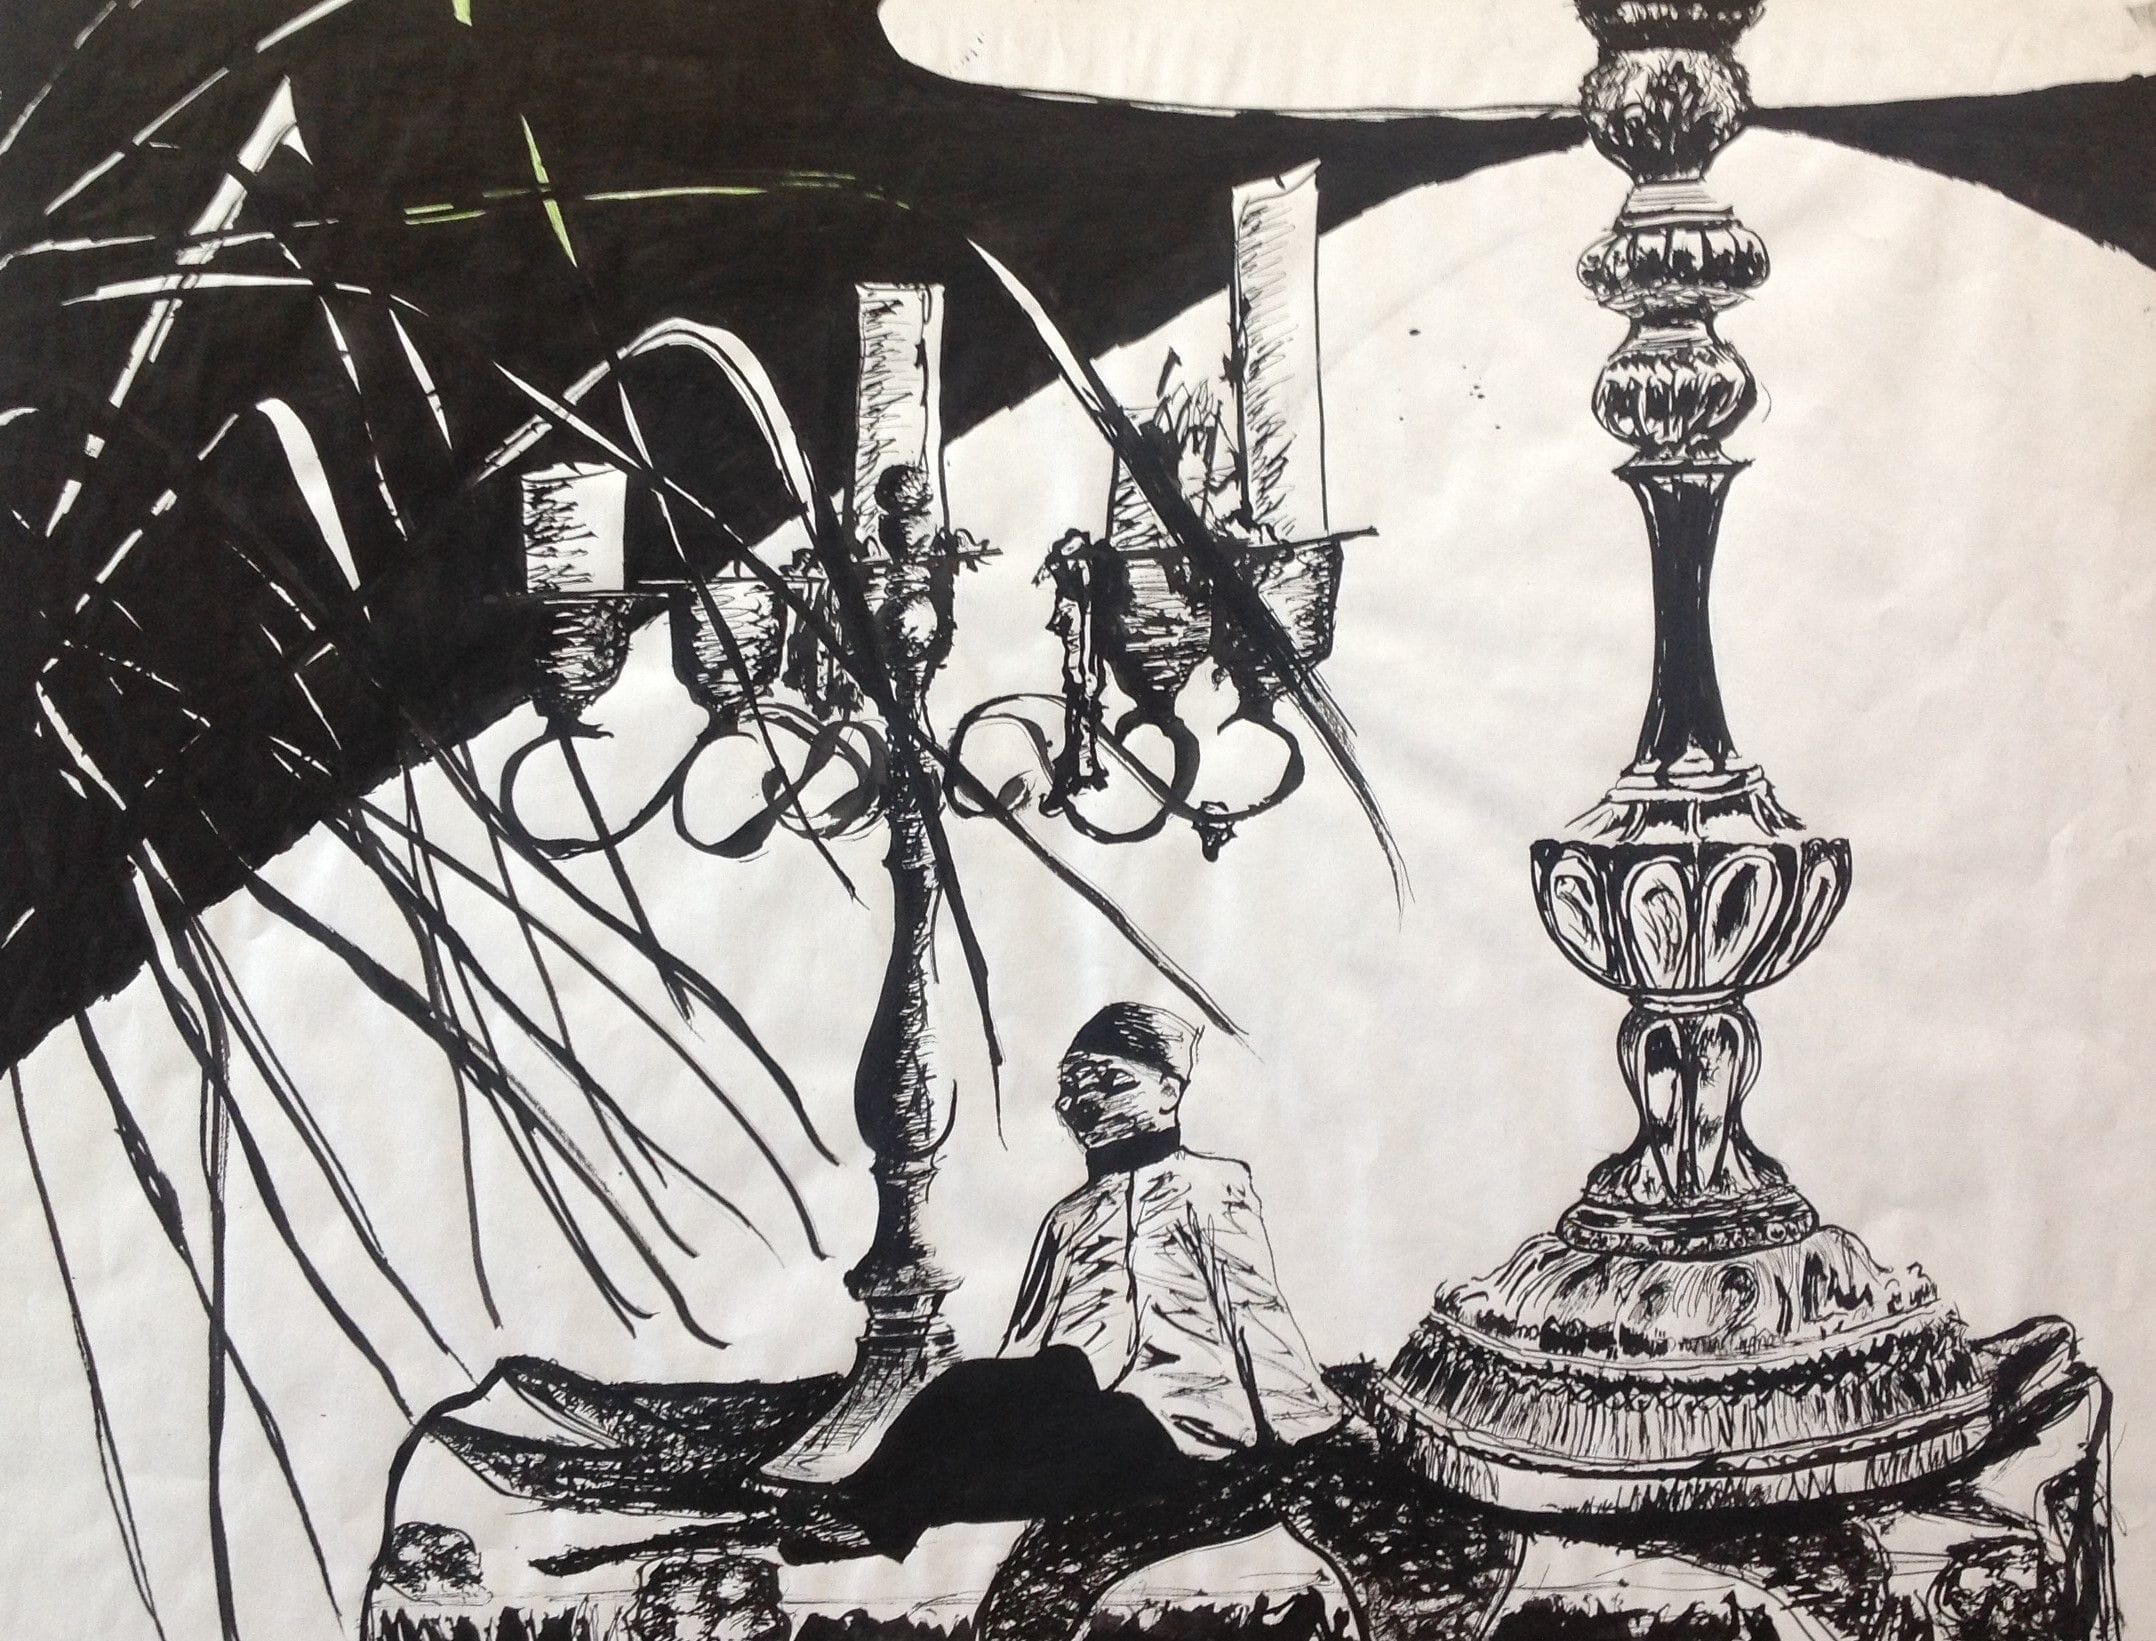 Still Life Drawn with Feathers and Twistie Ties, 1990
India Ink on Paper
20"W x 16"H, Walli White, artist